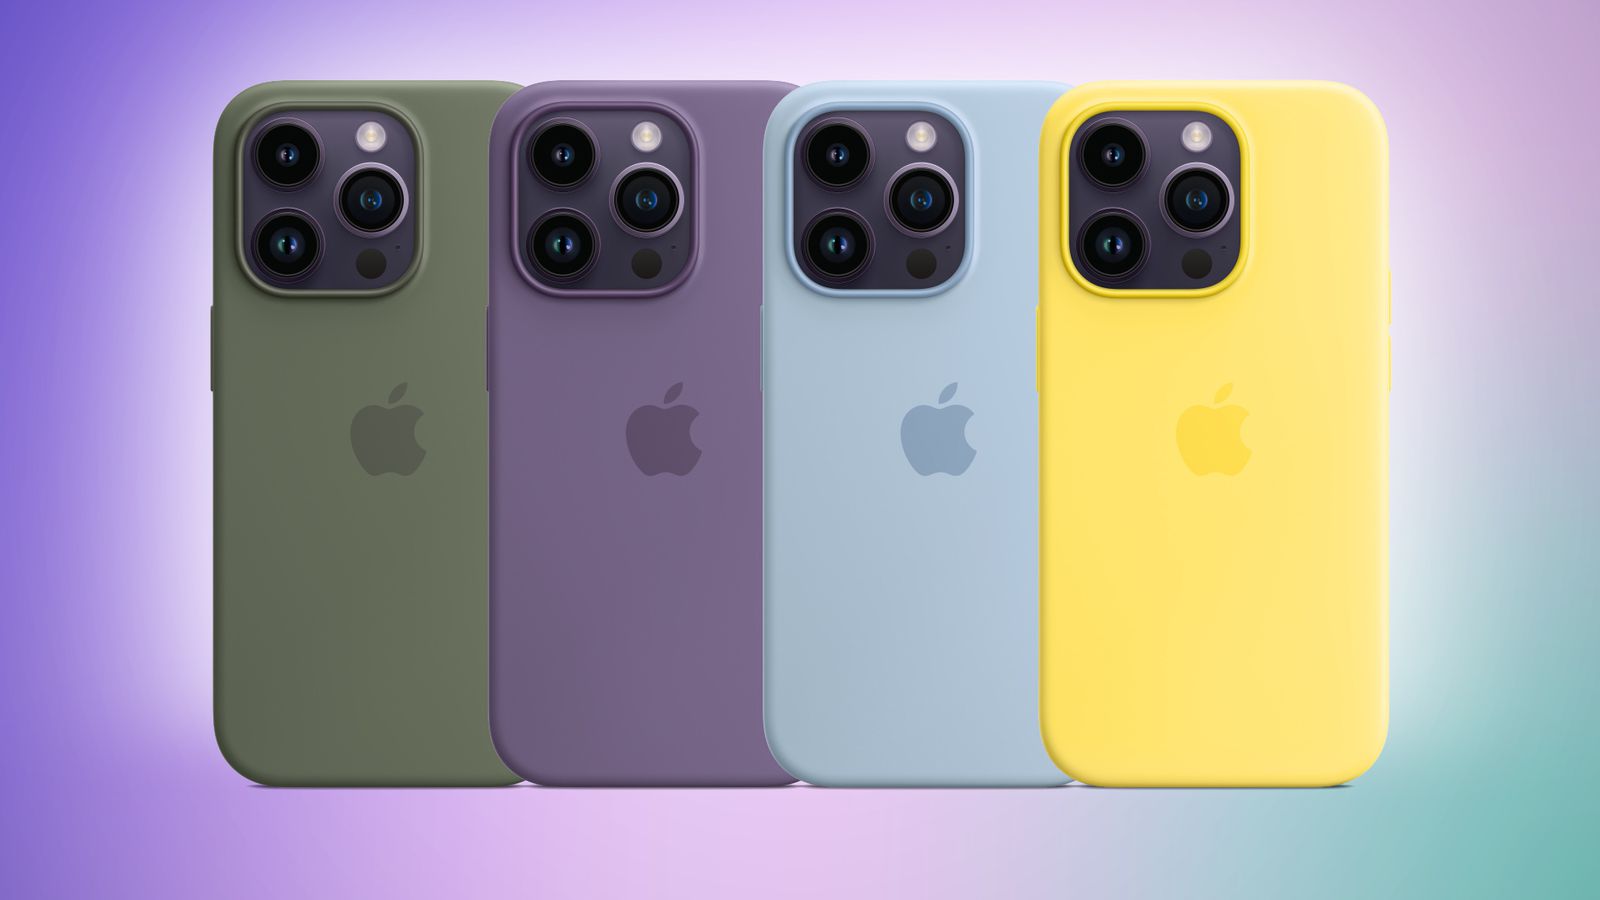 https://images.macrumors.com/t/ZPOOgePvIg8mAN5MDr14xKivnj4=/1600x0/article-new/2023/03/iPhone-14-and-14-Plus-New-Silcone-Case-Colors-Feature.jpg